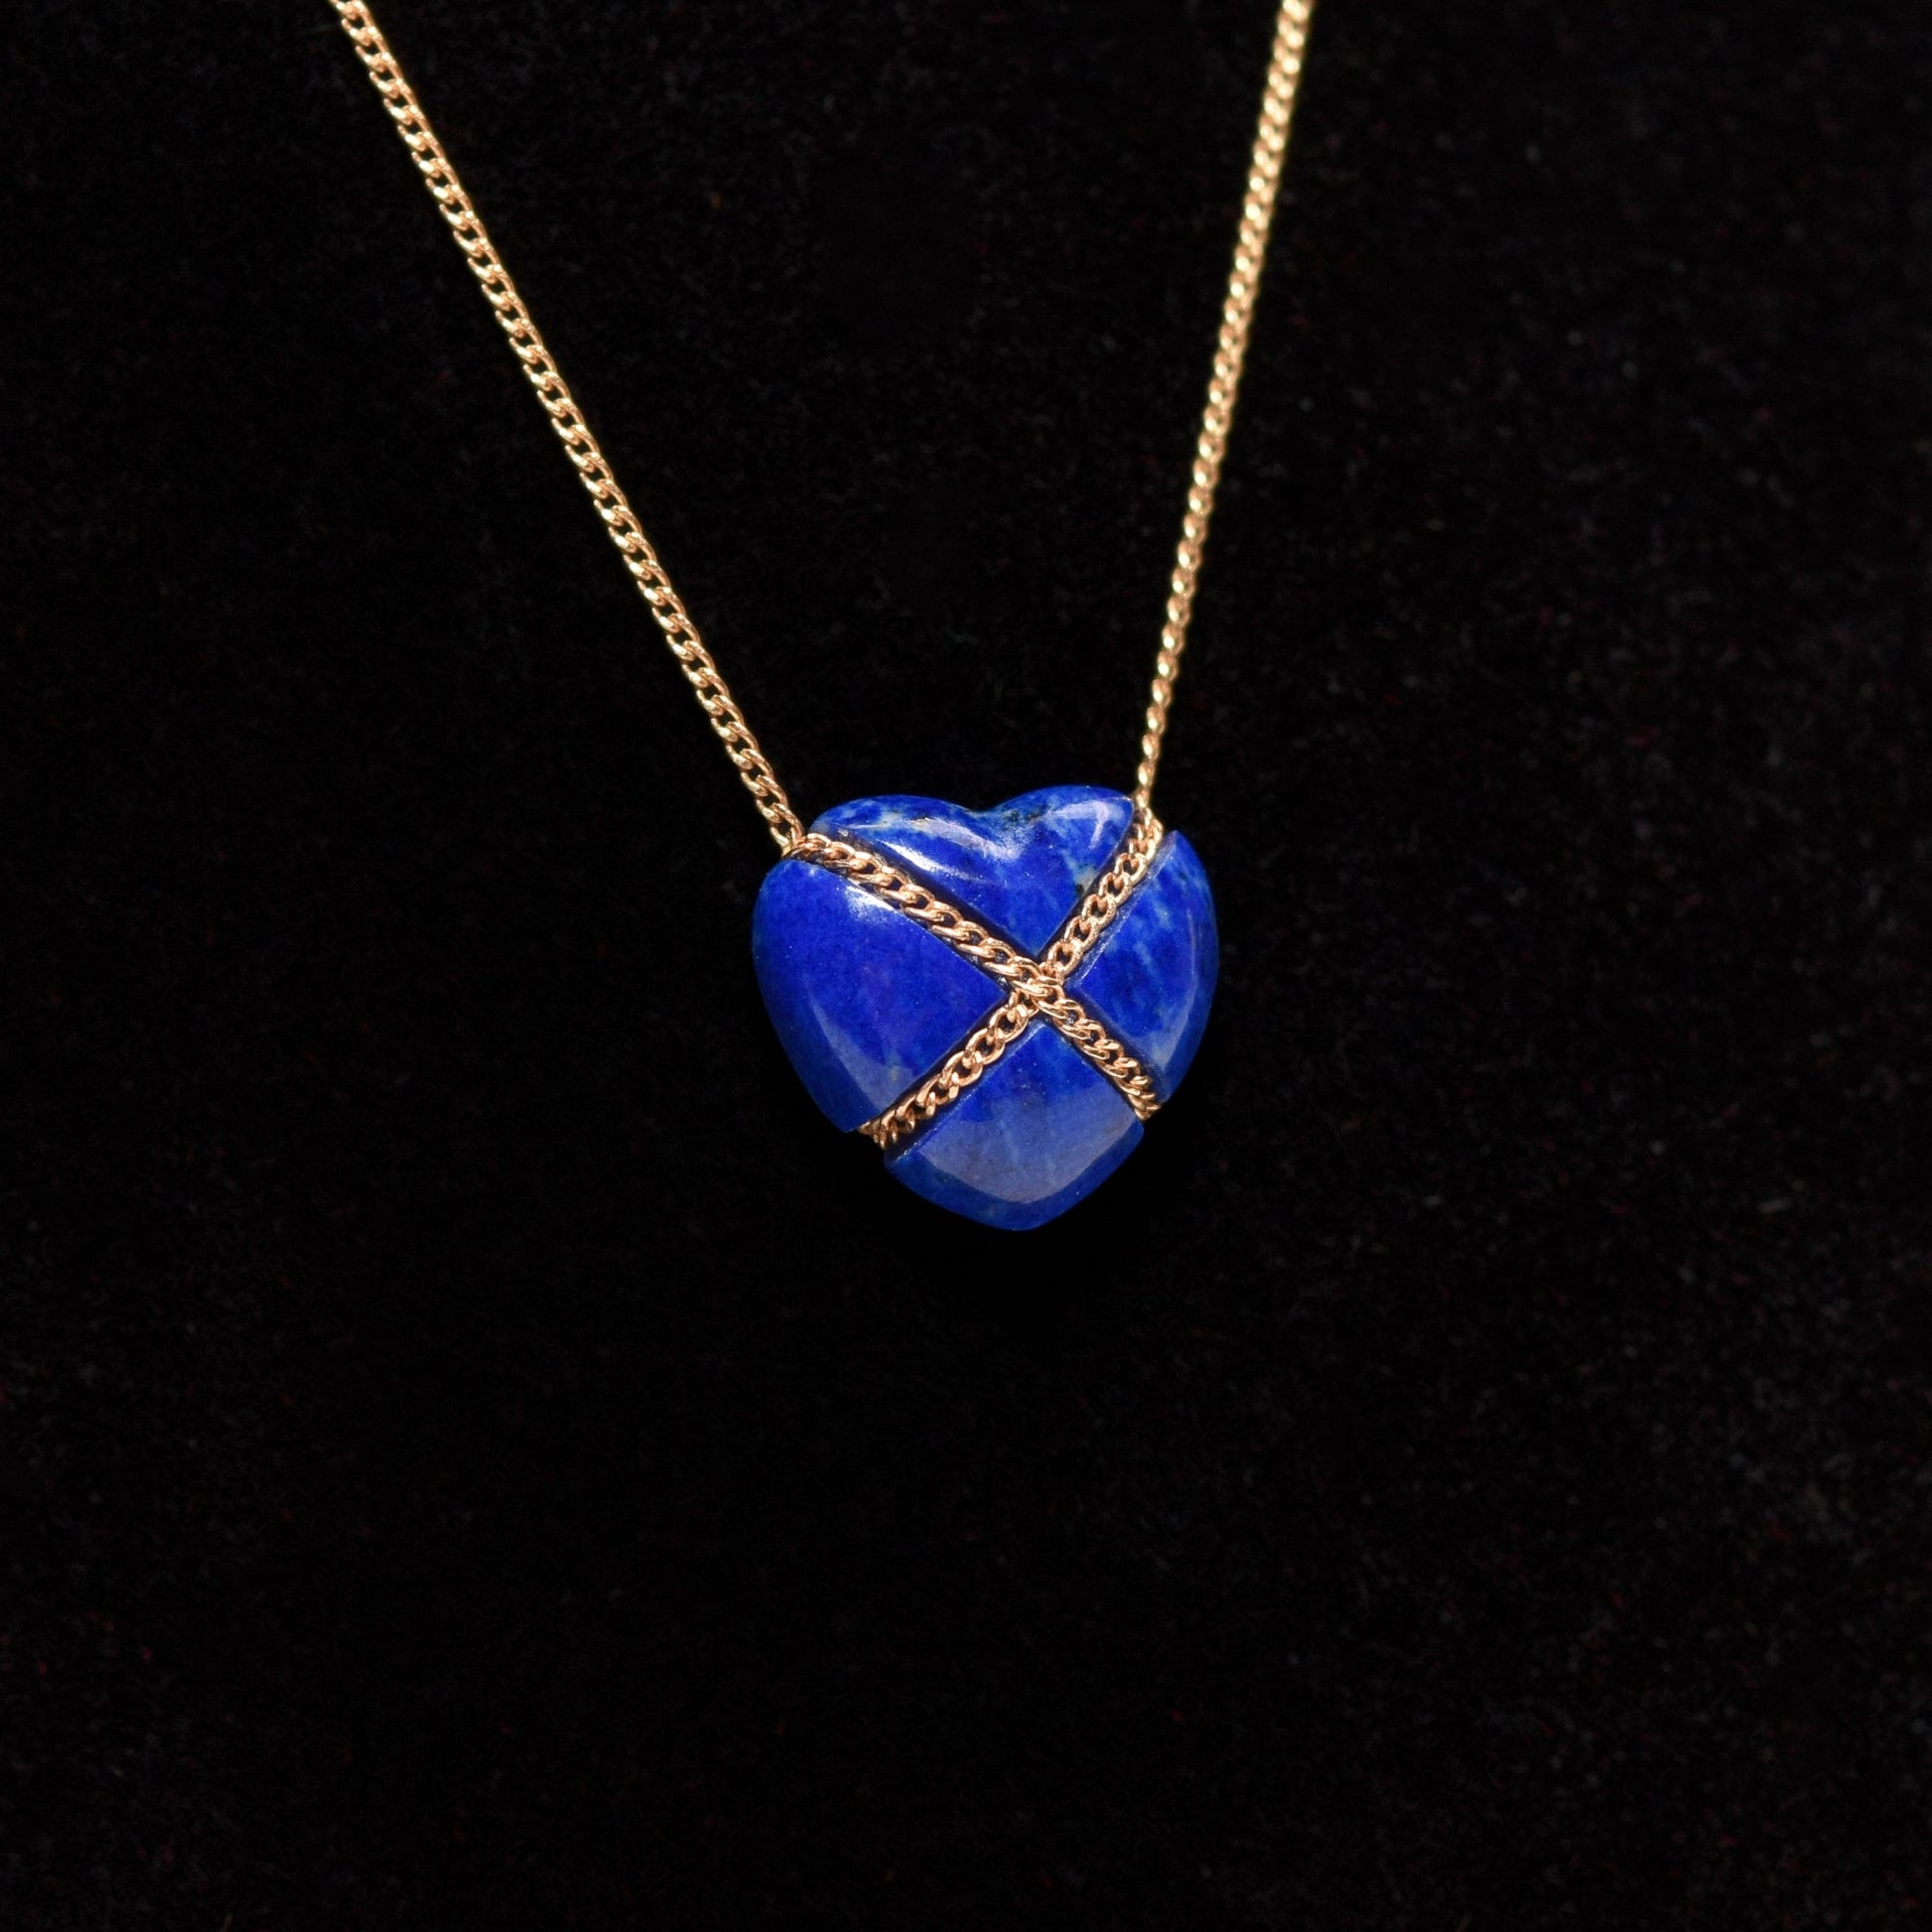 14K gold Tiffany & Co. lapis lazuli heart cross pendant necklace on a minimalist 18-inch chain against a black background.